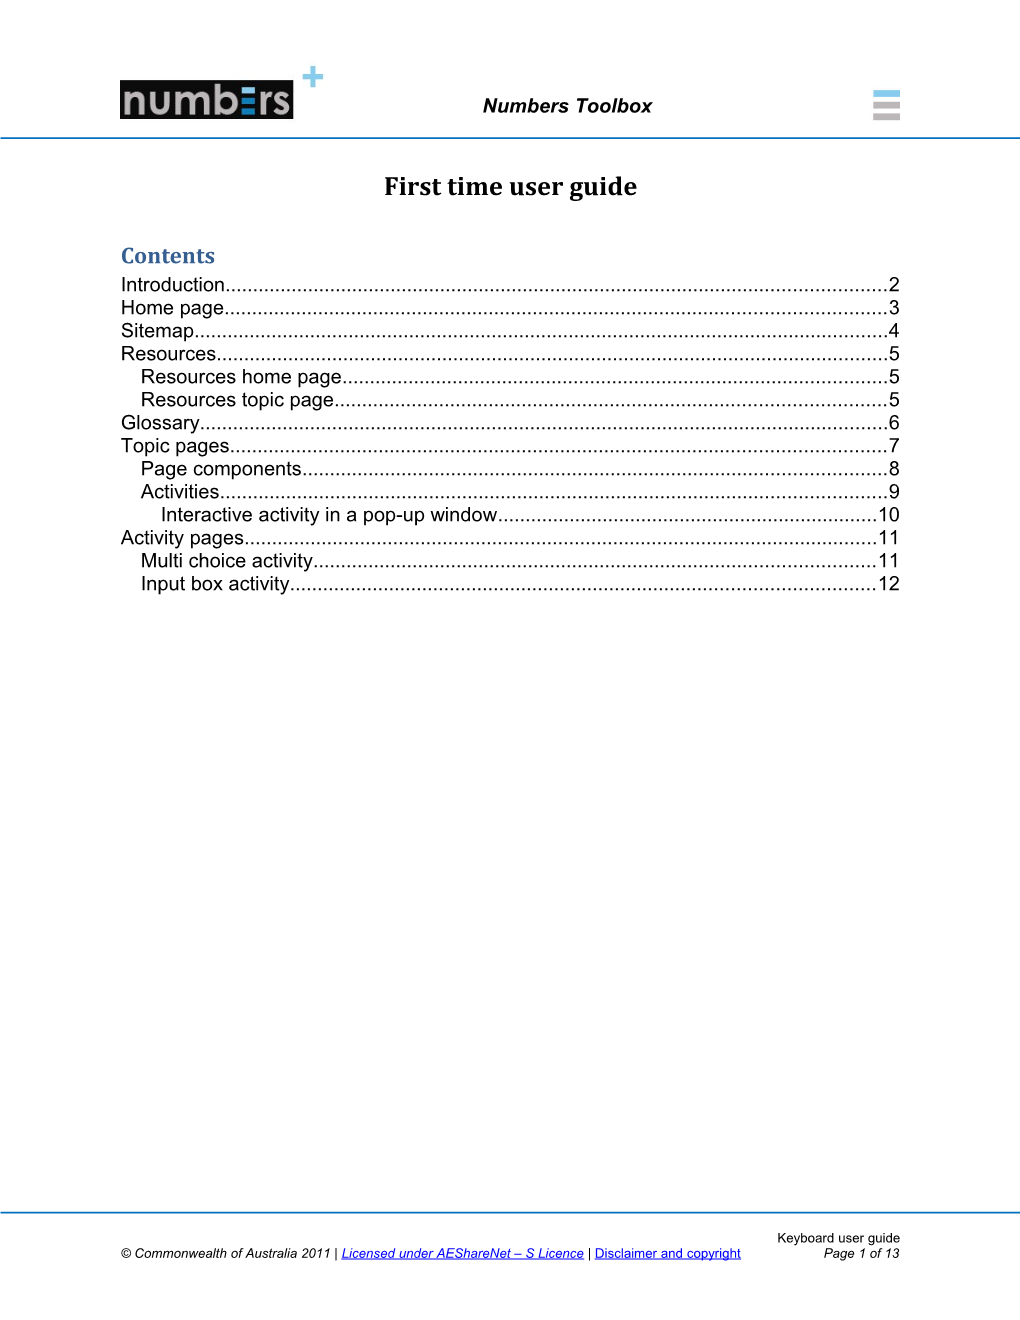 Numbers Toolbox - First Time User Guide